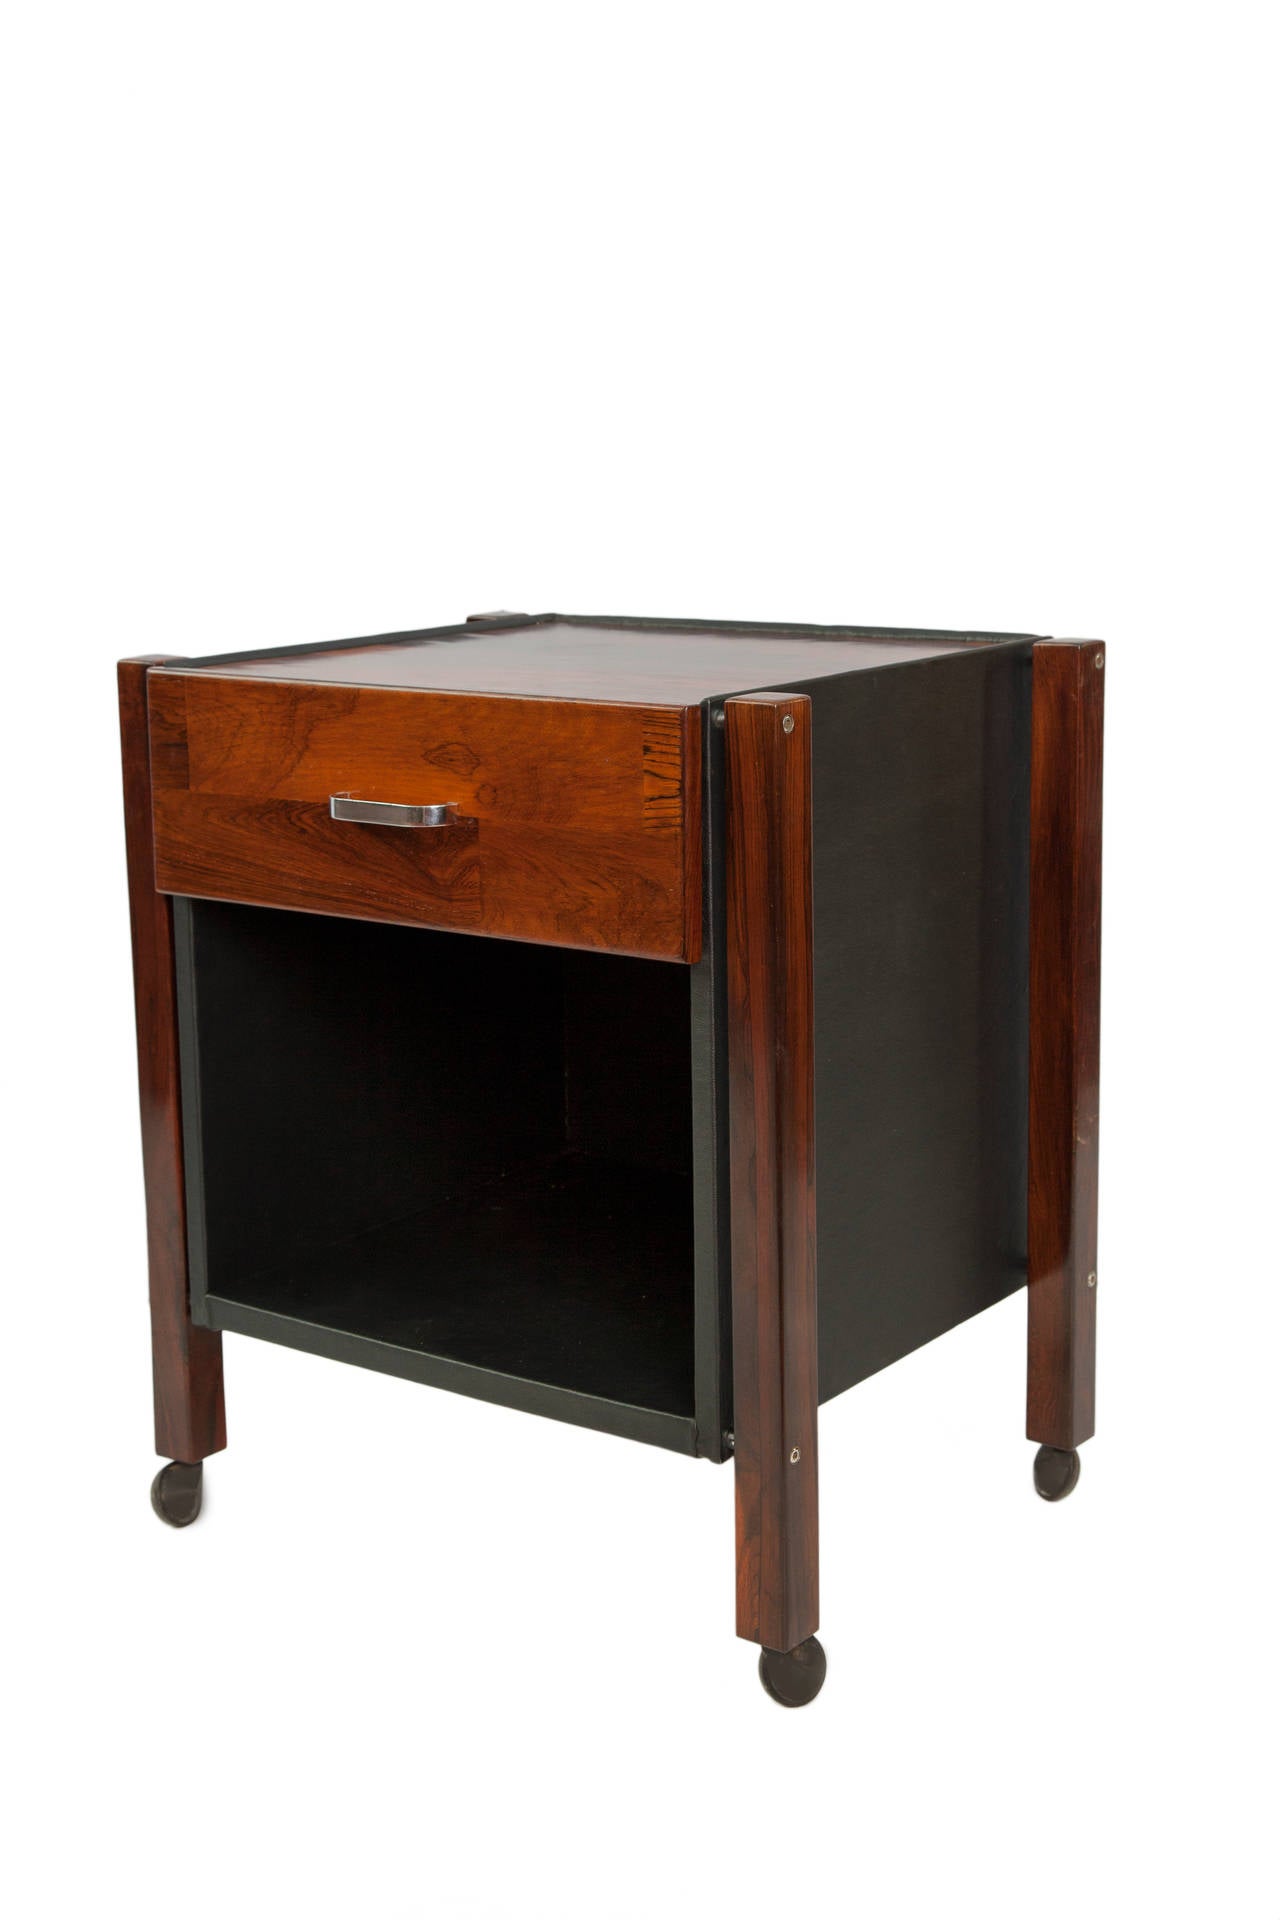 Brazilian Pair of Jorge Zalszupin Side Tables in Jacaranda and Black Leather for L'Atelier